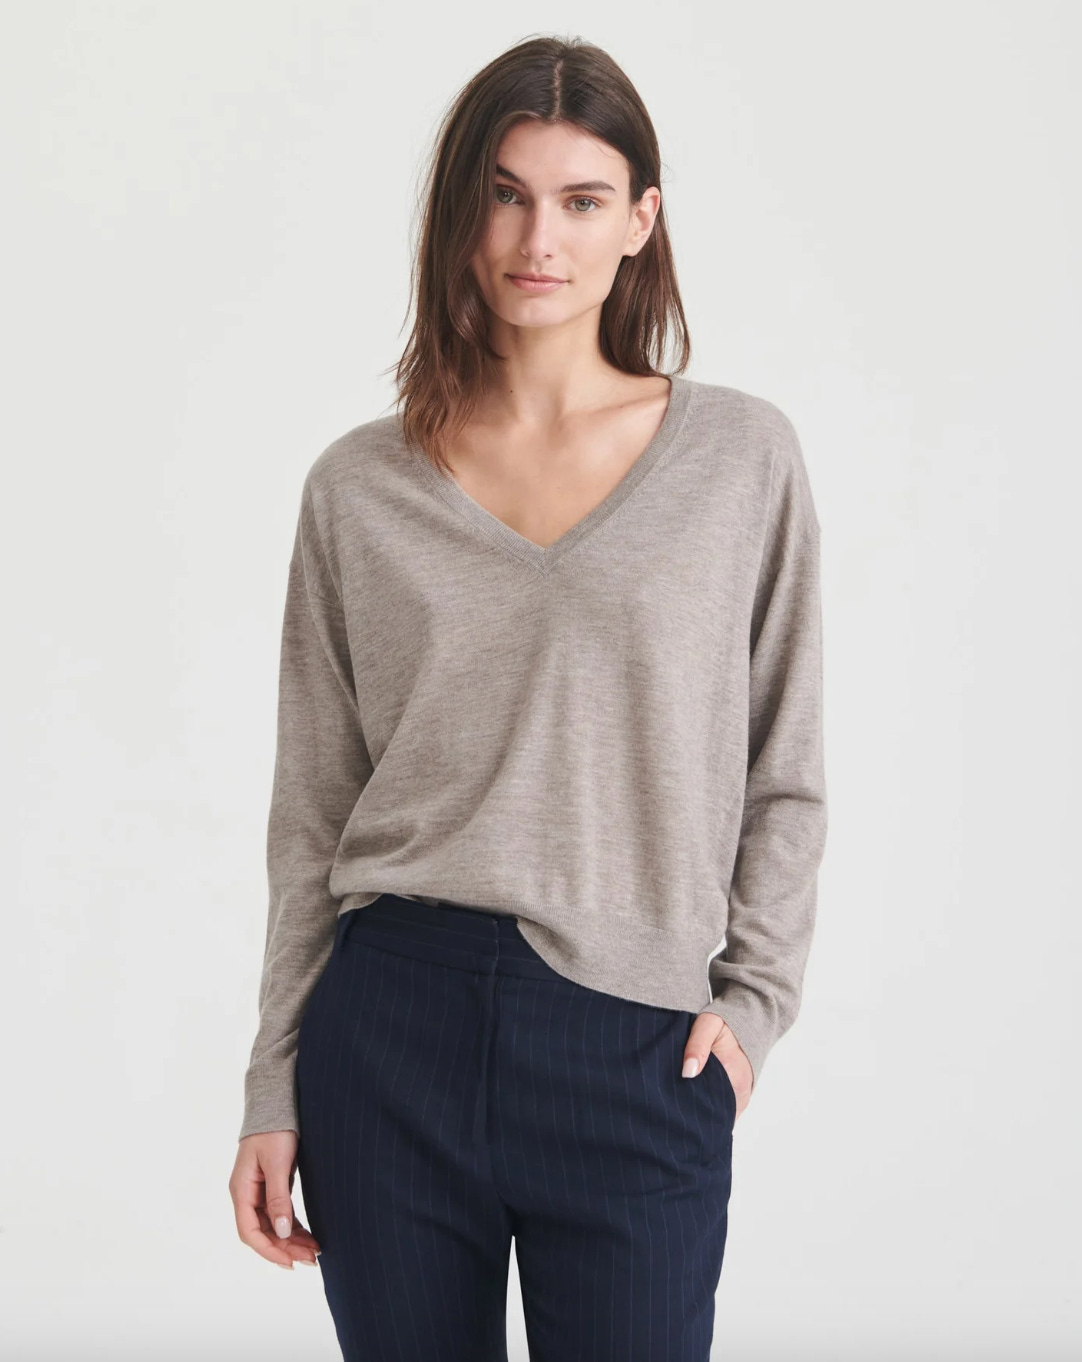 8 good resources for cashmere - by Kim France